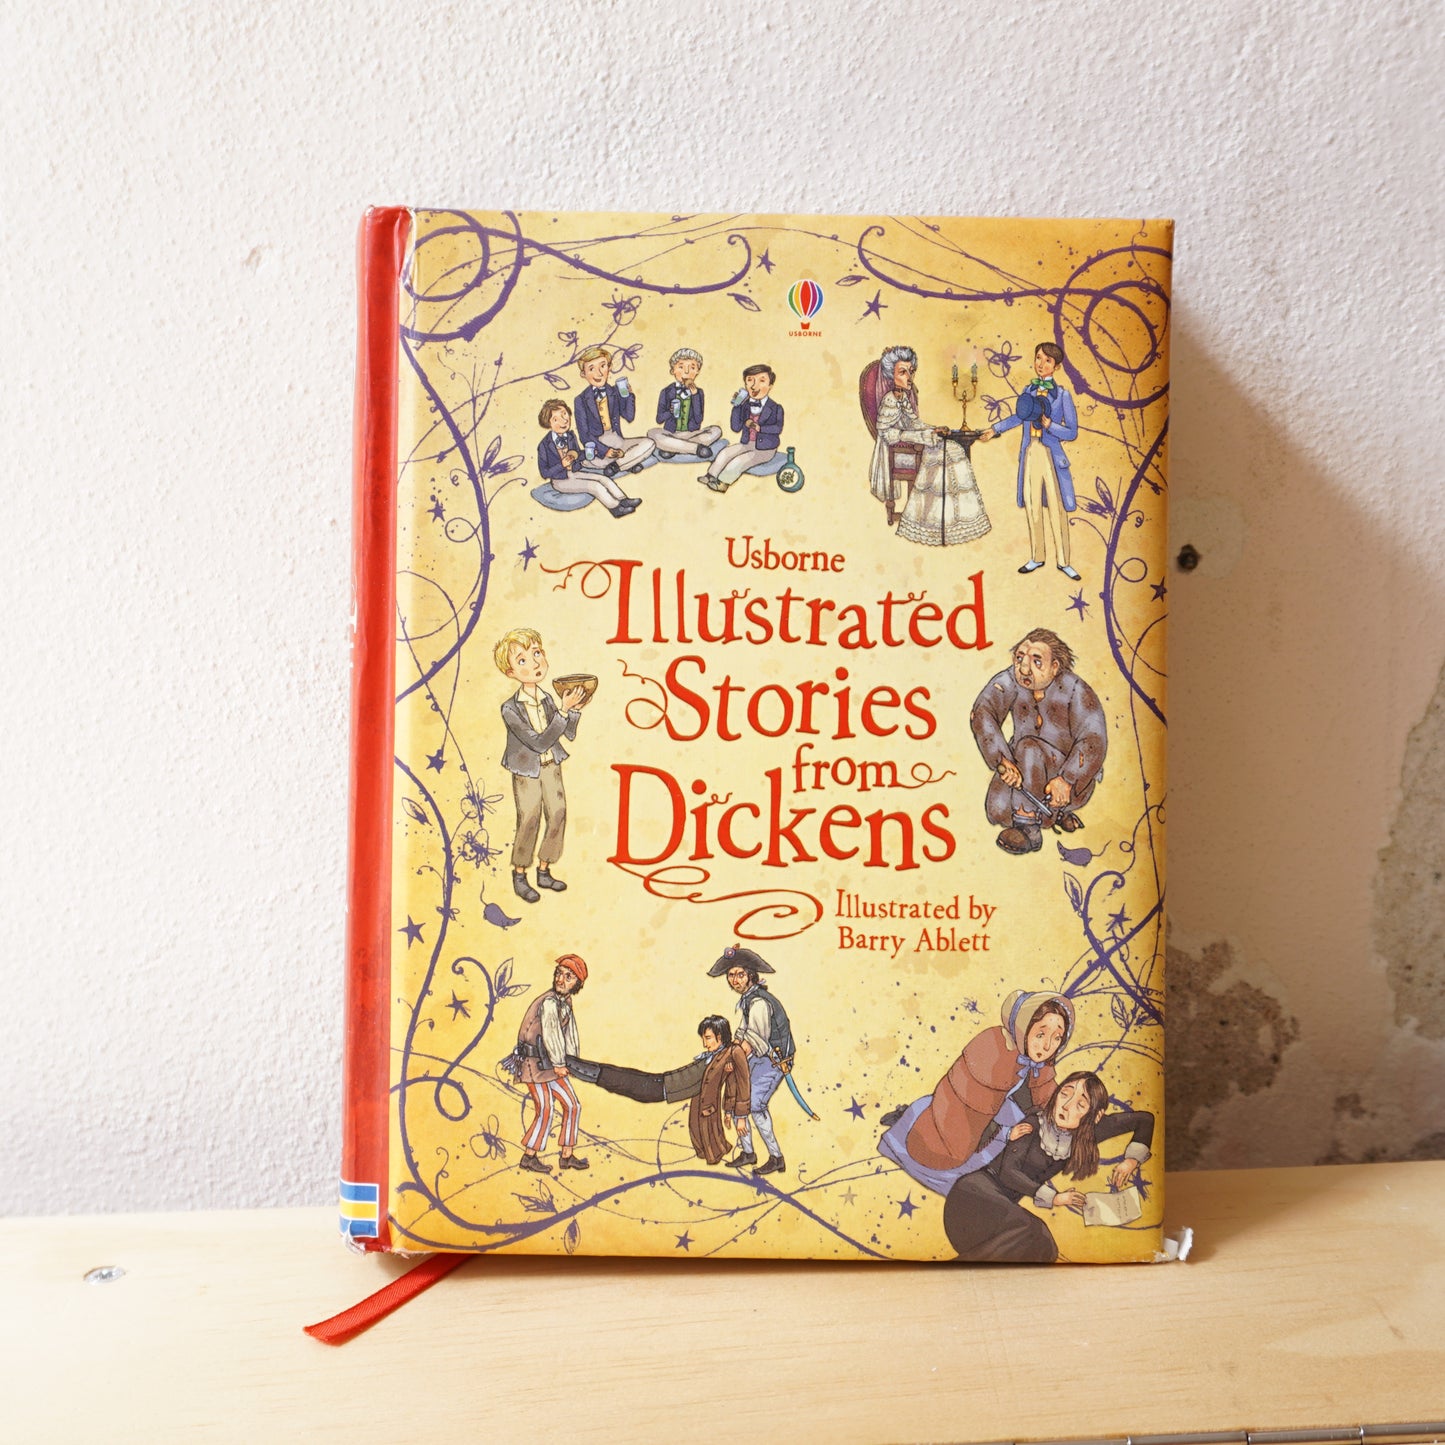 Usborne Illustrated Stories from Dickens - Mary Sebag-Montefiore